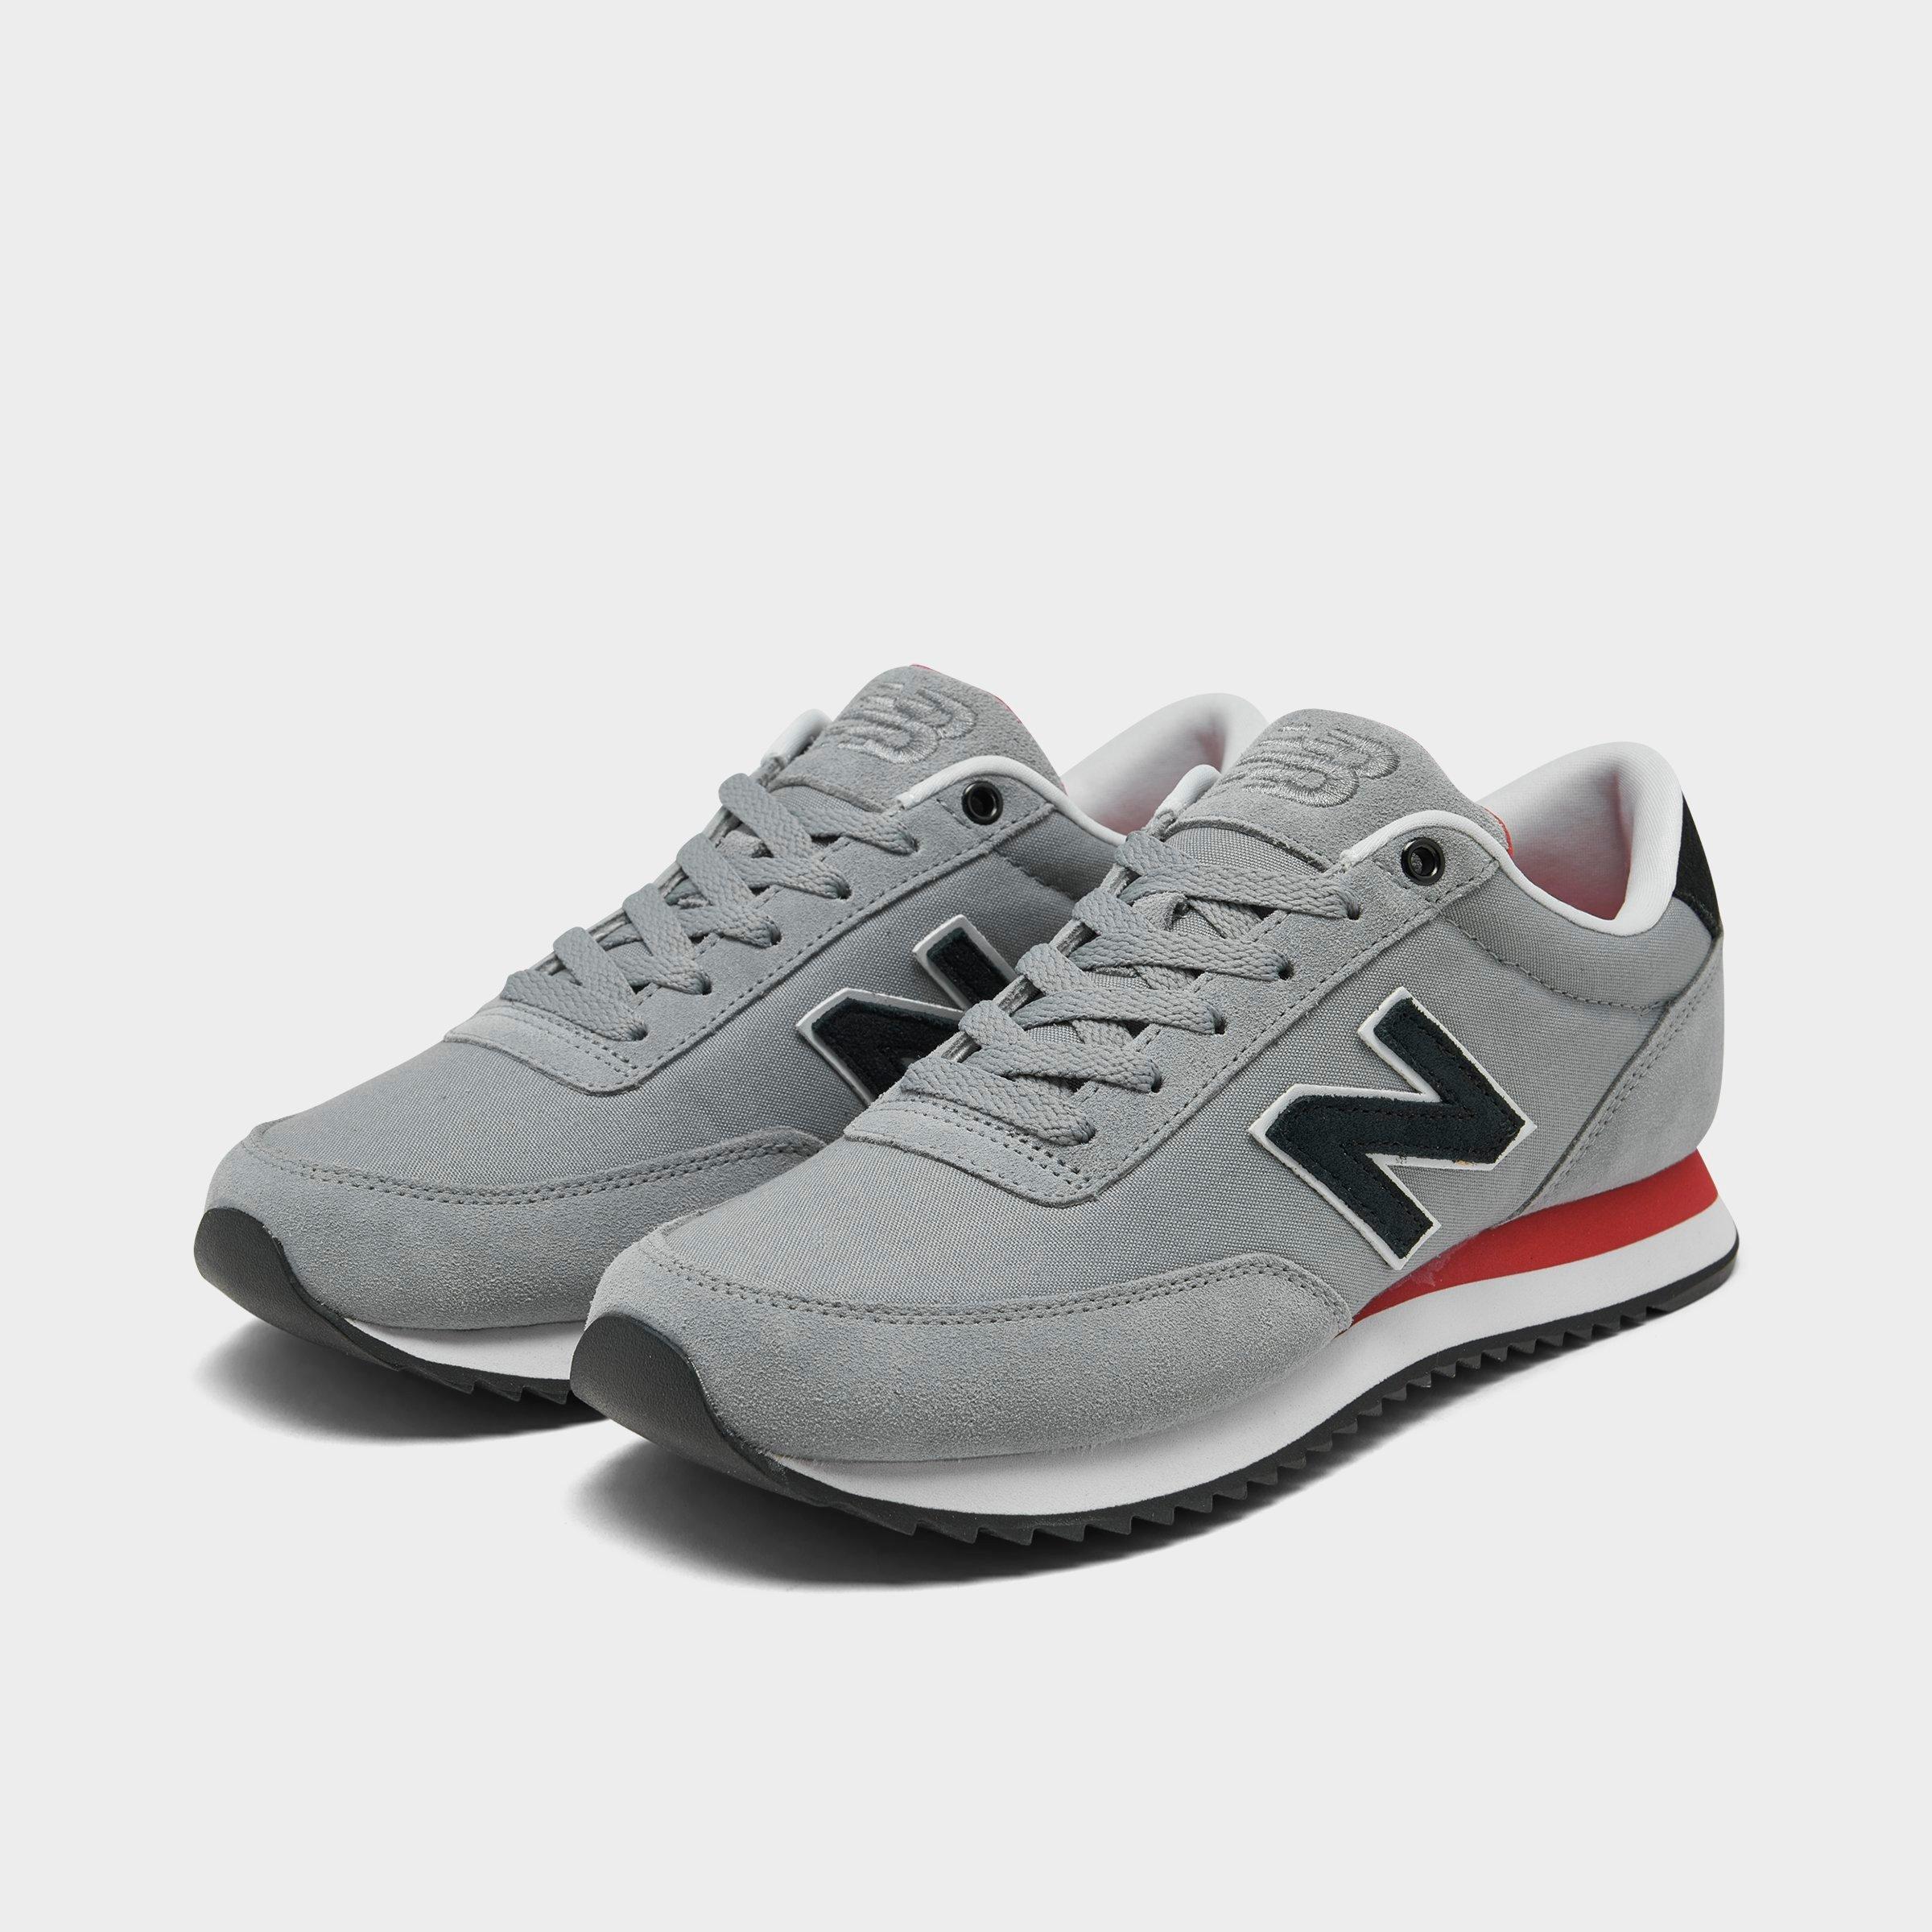 men's new balance 501 casual running shoes